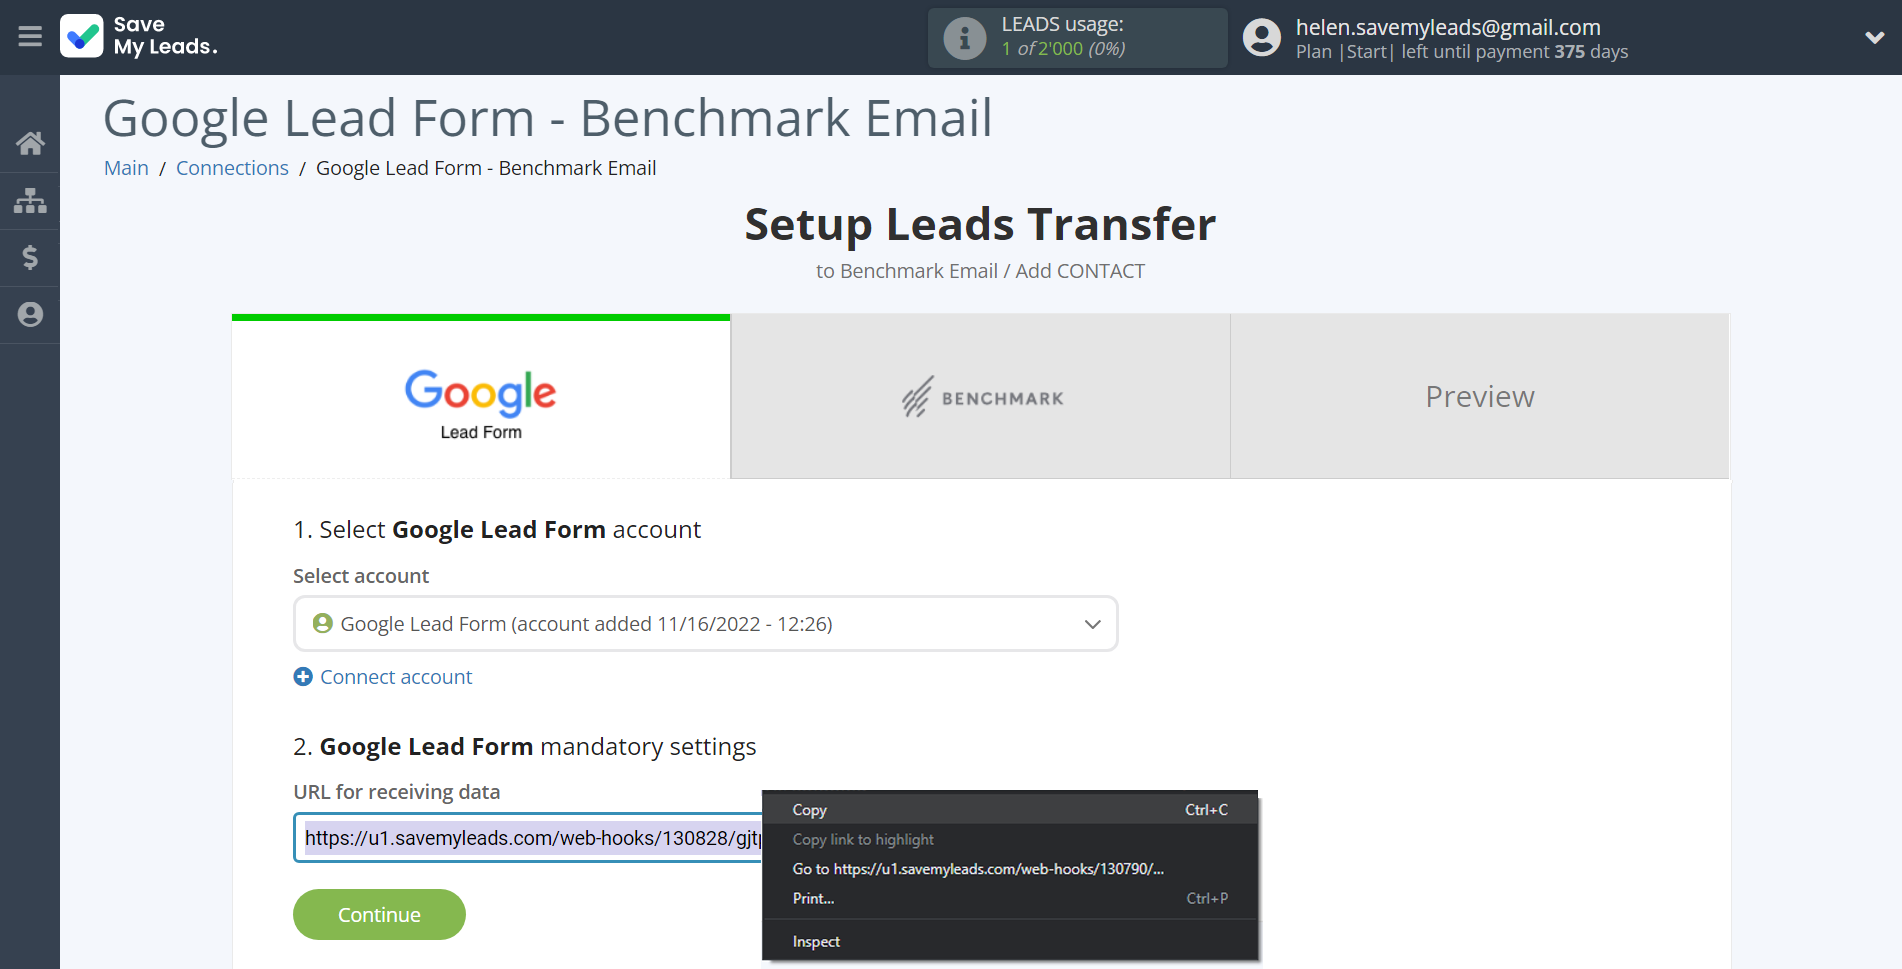 How to Connect Google Lead Form with Benchmark Email | Data Source account connection